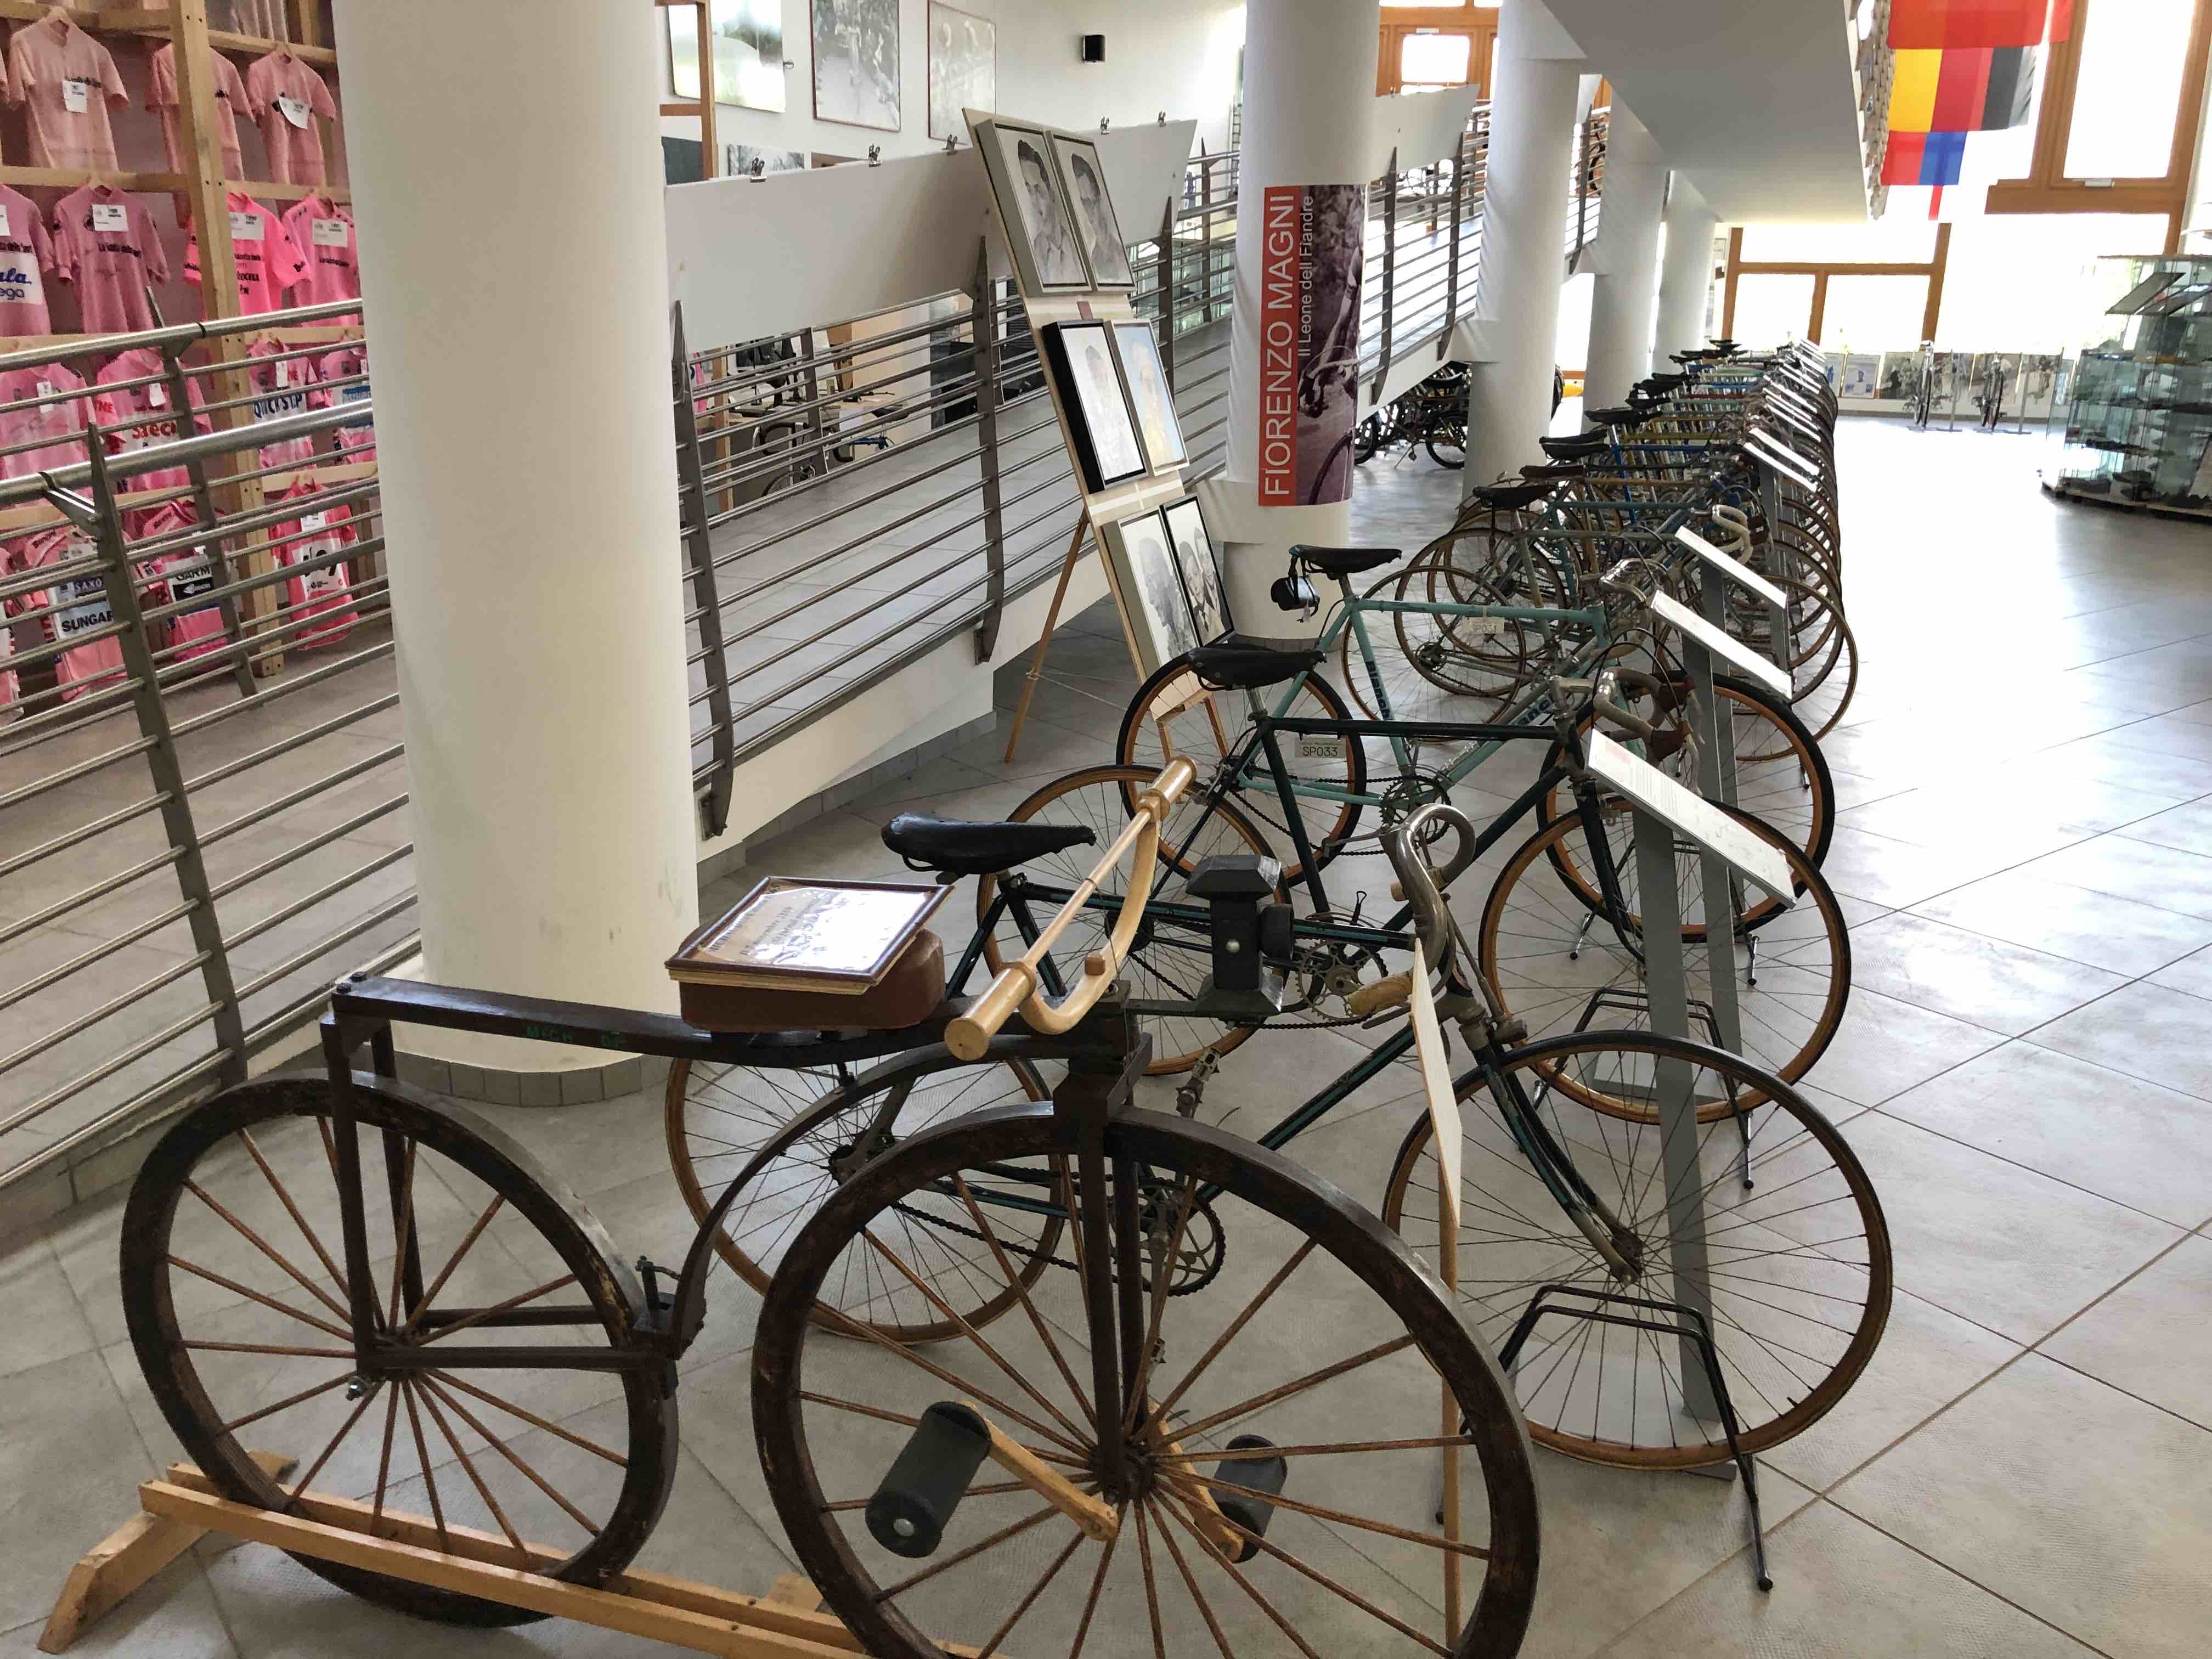 Old bicycles ranging over 100 years of history parked in a row inside the Museo del Ciclismo, a cycling museum